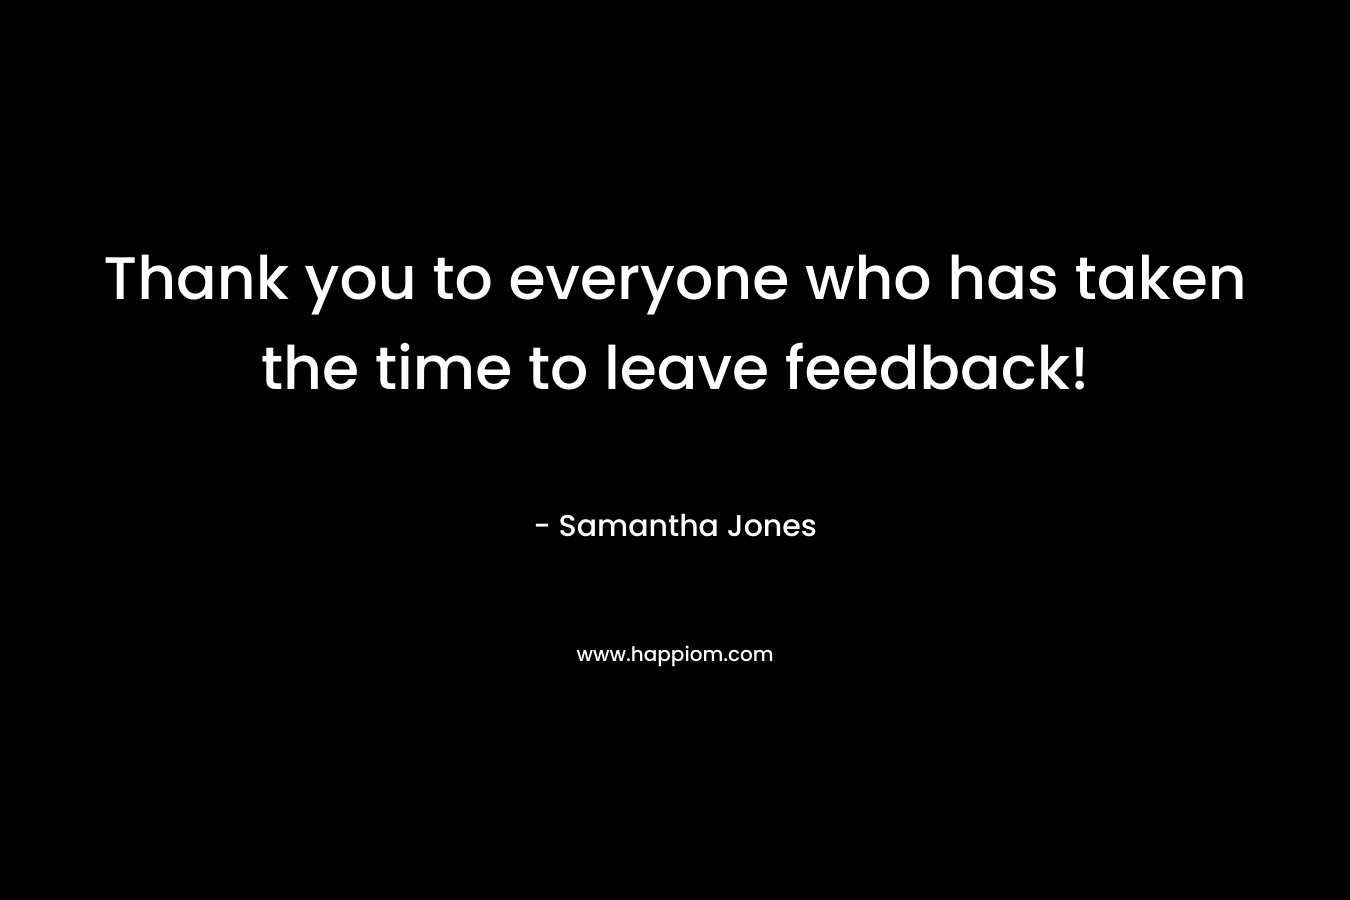 Thank you to everyone who has taken the time to leave feedback! – Samantha Jones